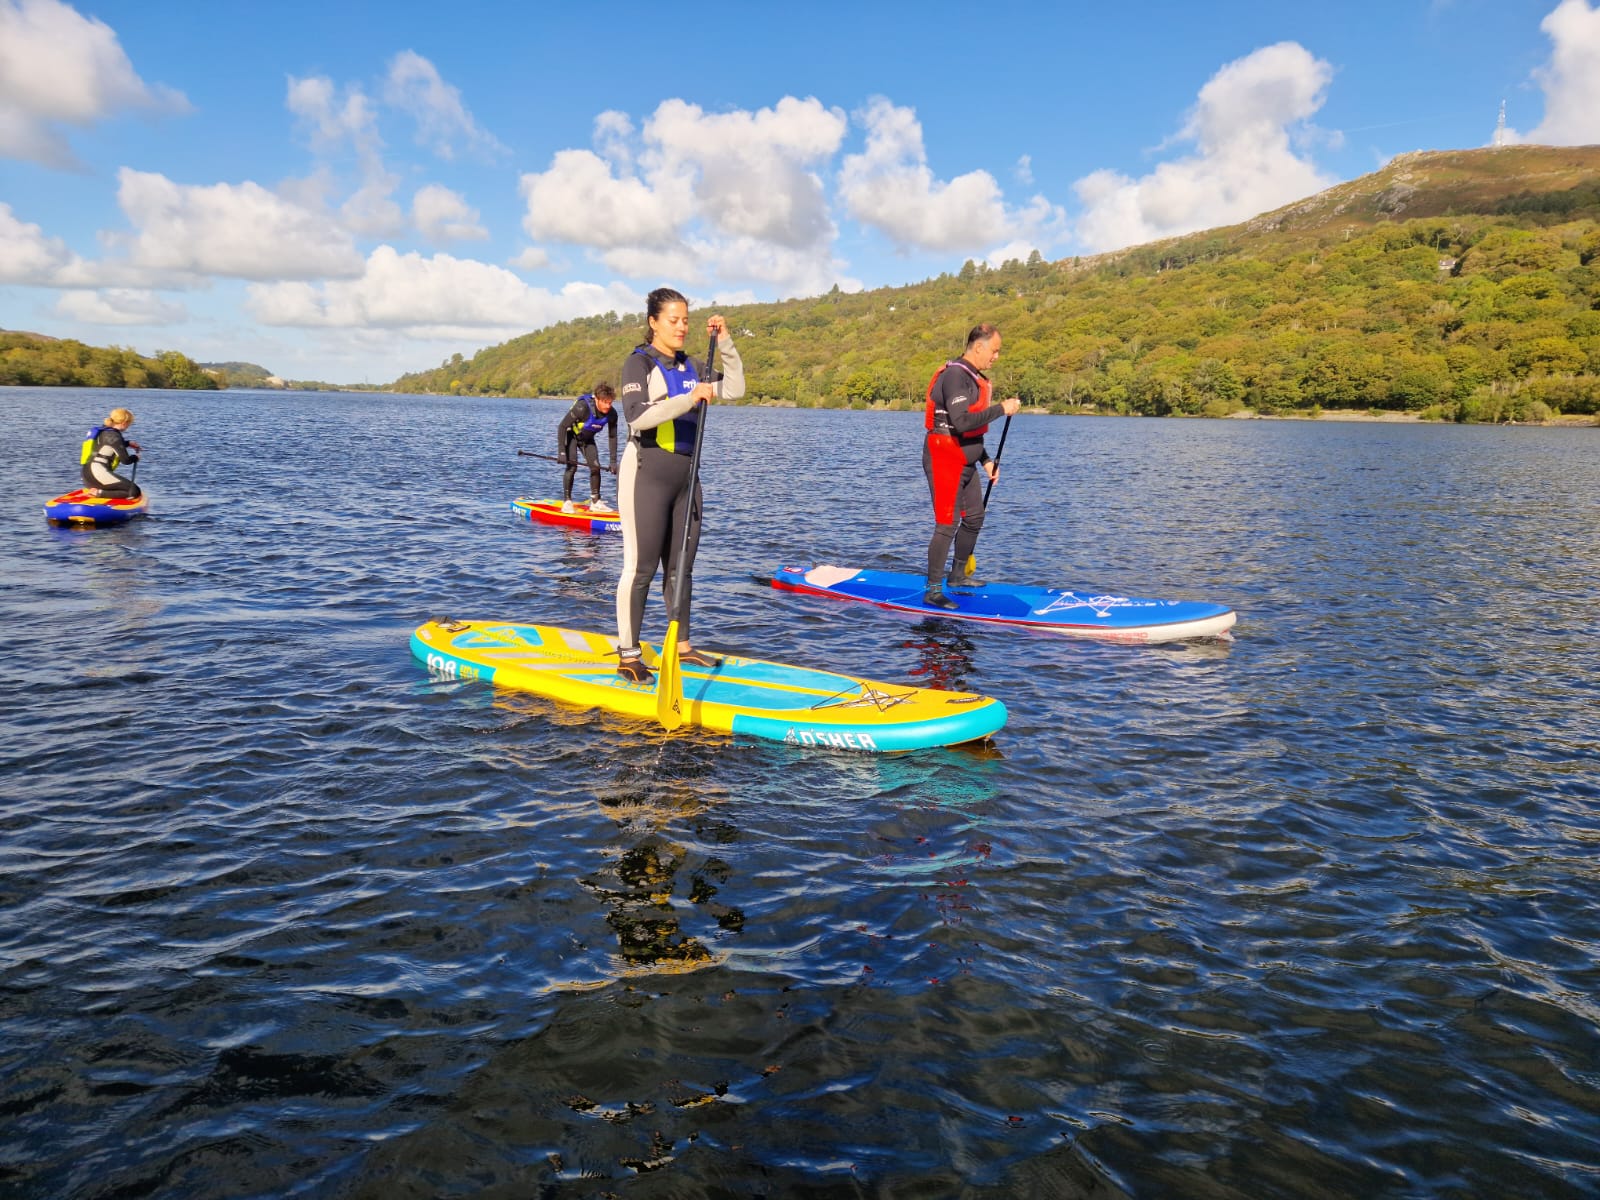 A group learning to SUP on Llyn Padarn, a lake in Snowdonia. Photo: Adventurous Ewe.